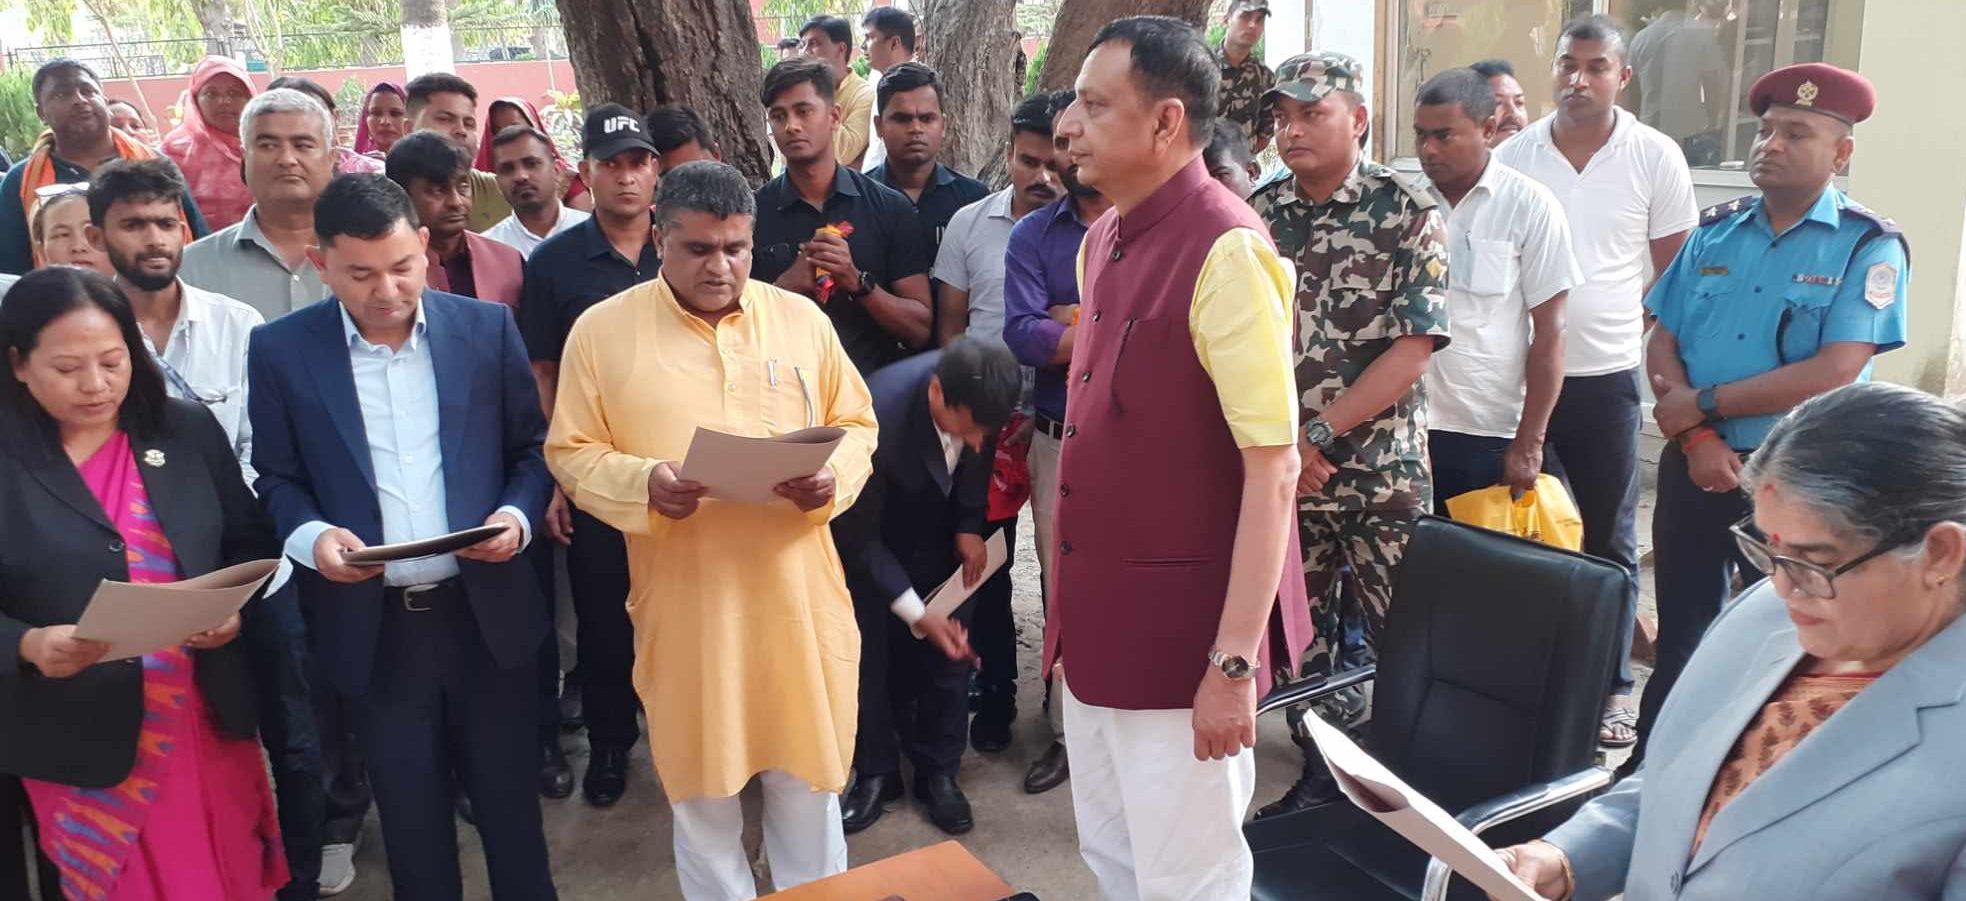 Madhesh Province’s Chief Minister Yadav expands cabinet